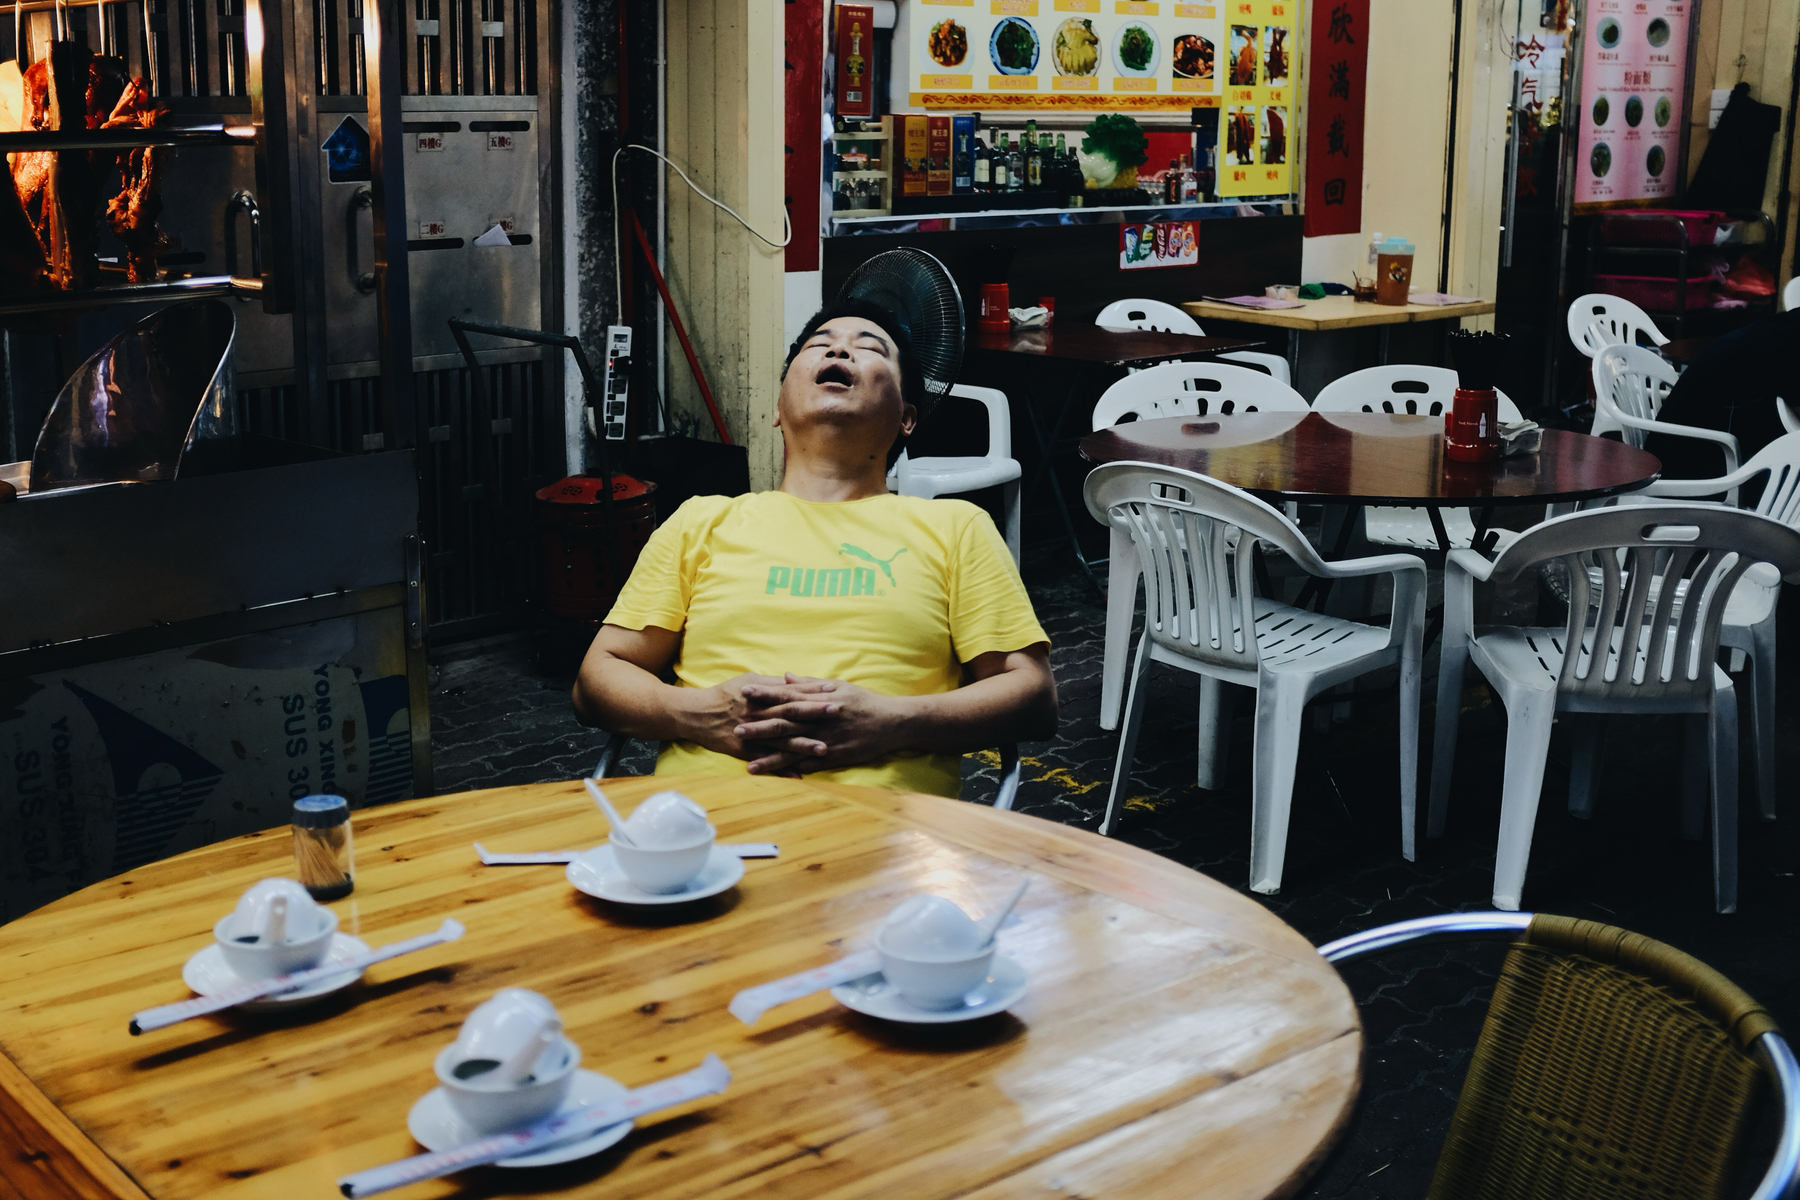 A man sleeps while sitting at a restaurant table. 